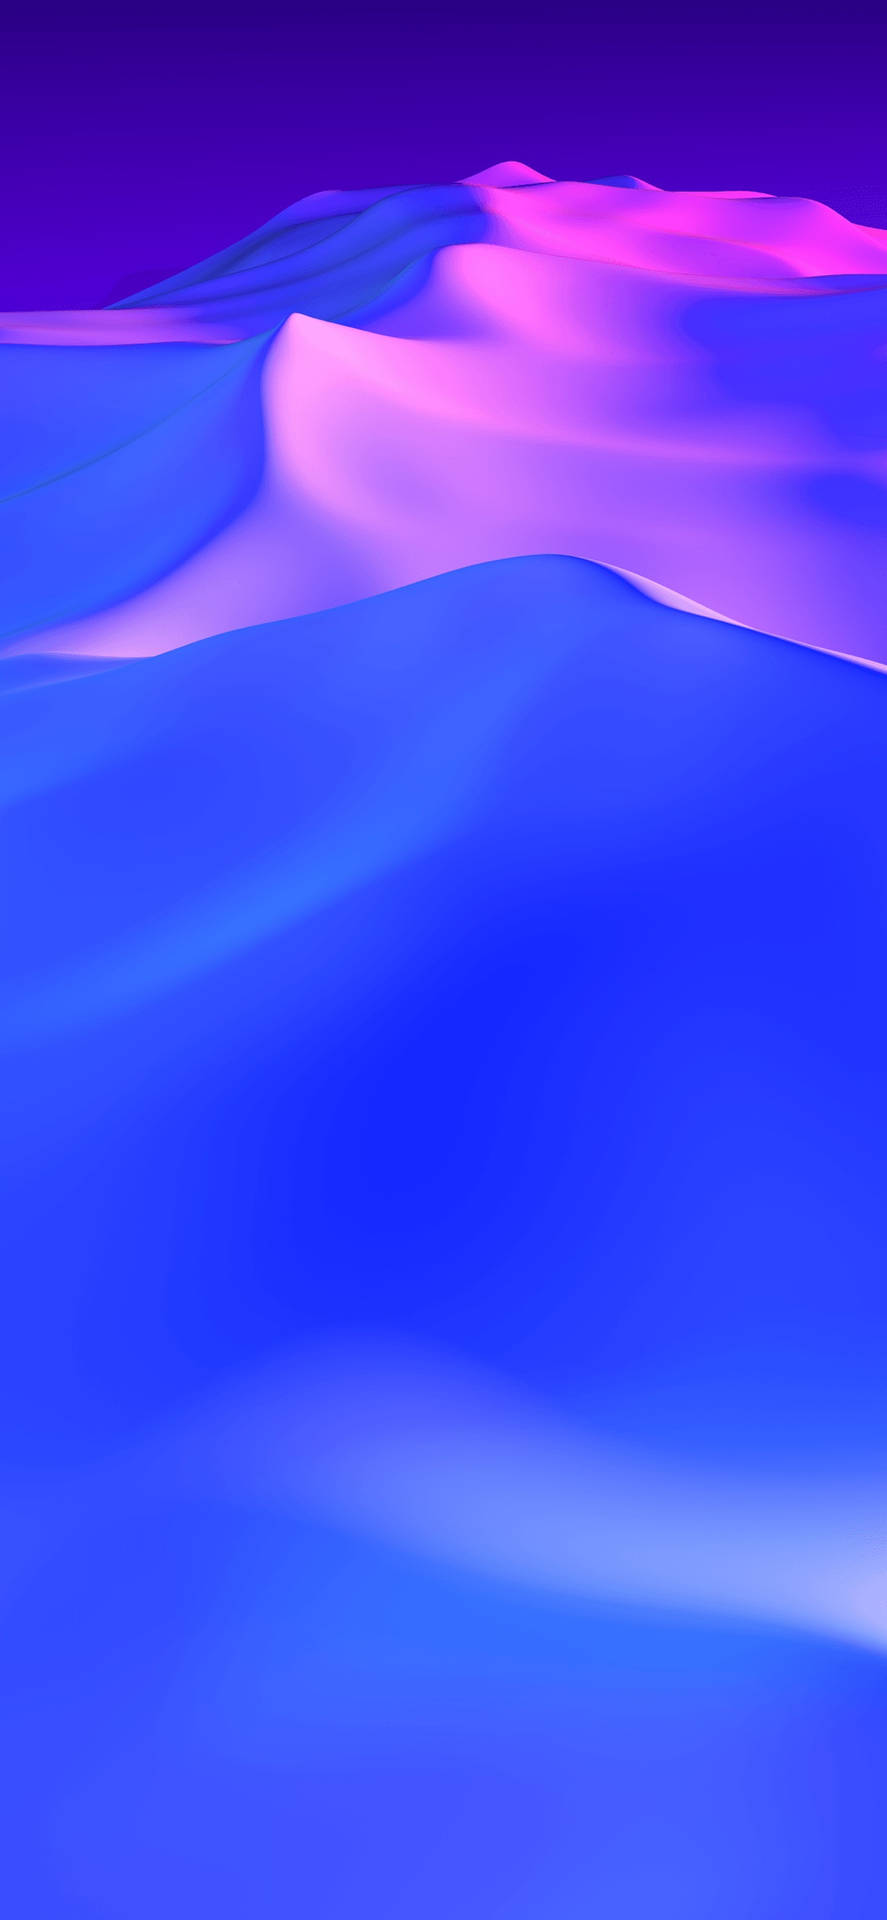 iPhone X Original Blue And Purple Mountains Wallpaper